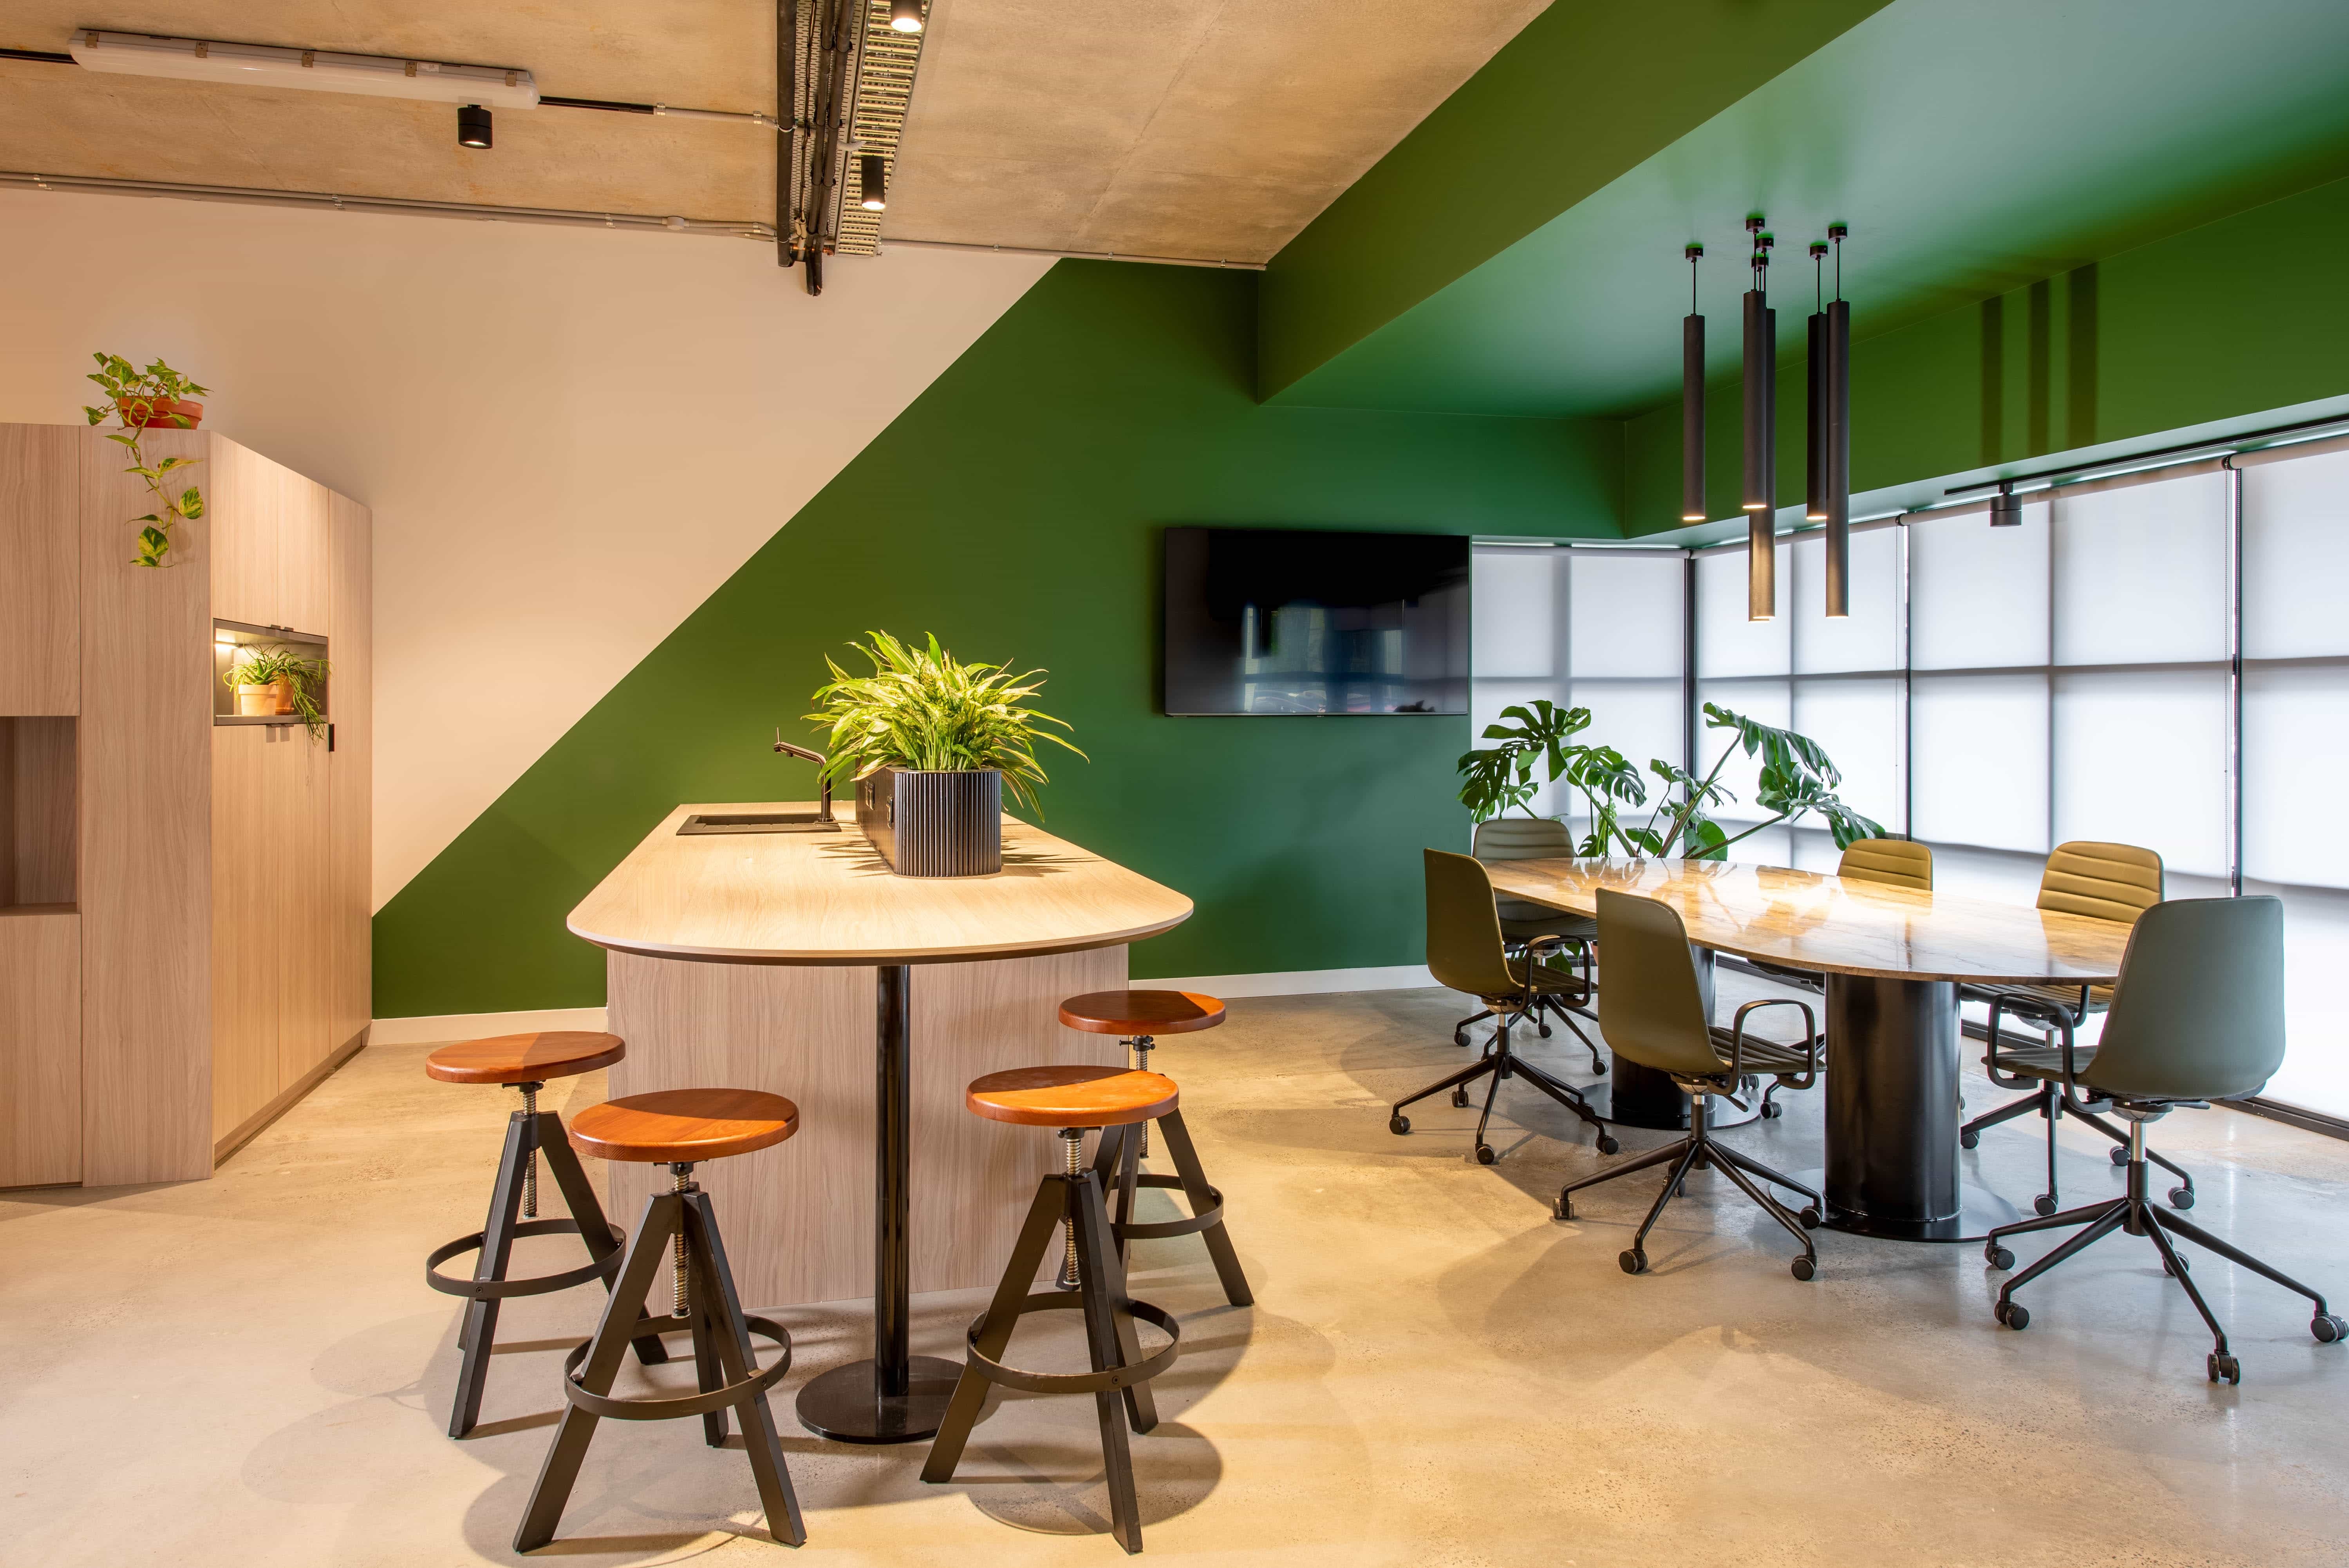 Cucumber: Step aside, coworking. Cucumber Offices are in town and here to stay.